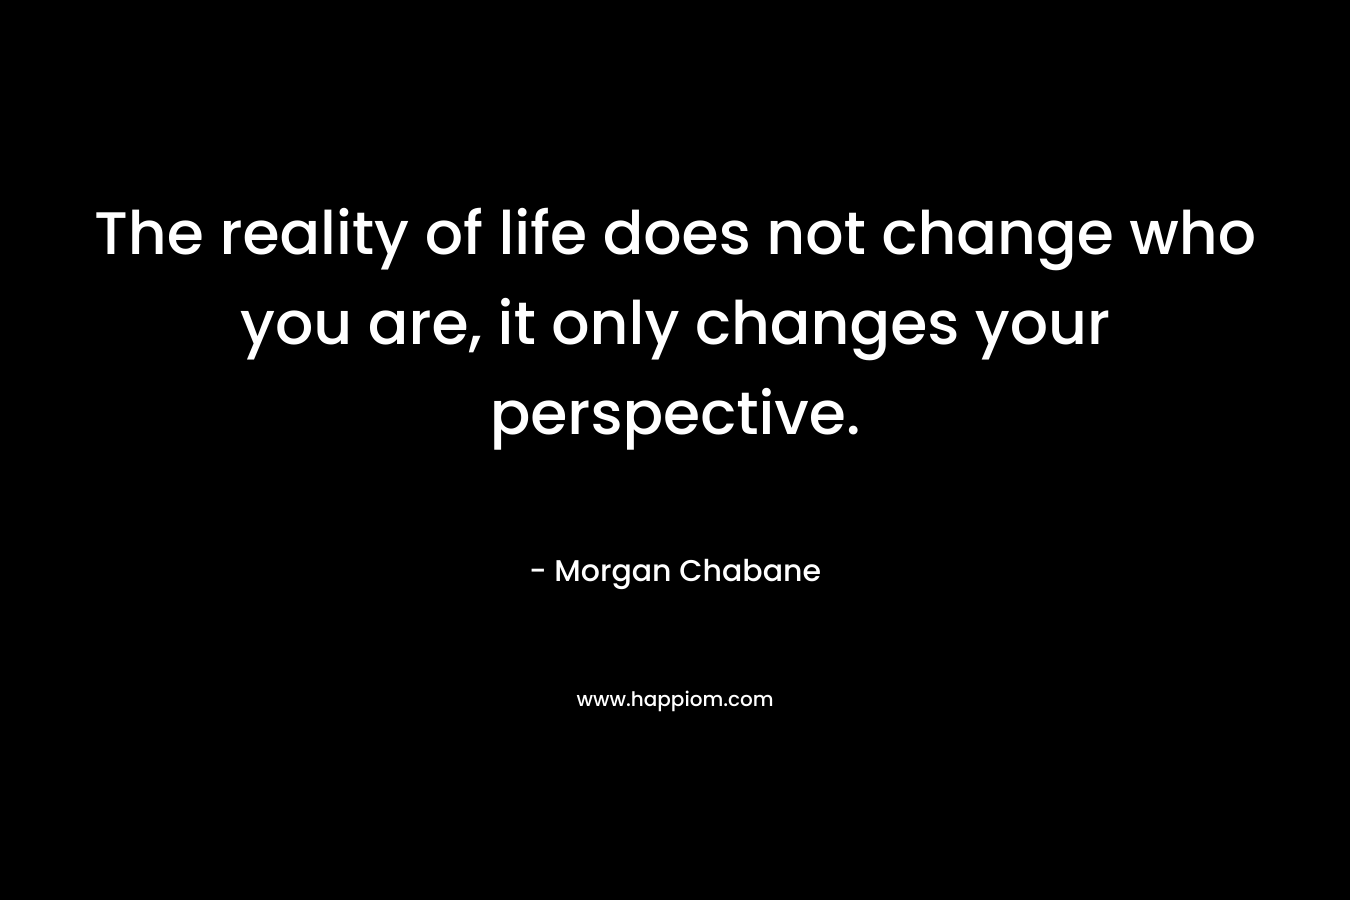 The reality of life does not change who you are, it only changes your perspective. – Morgan Chabane